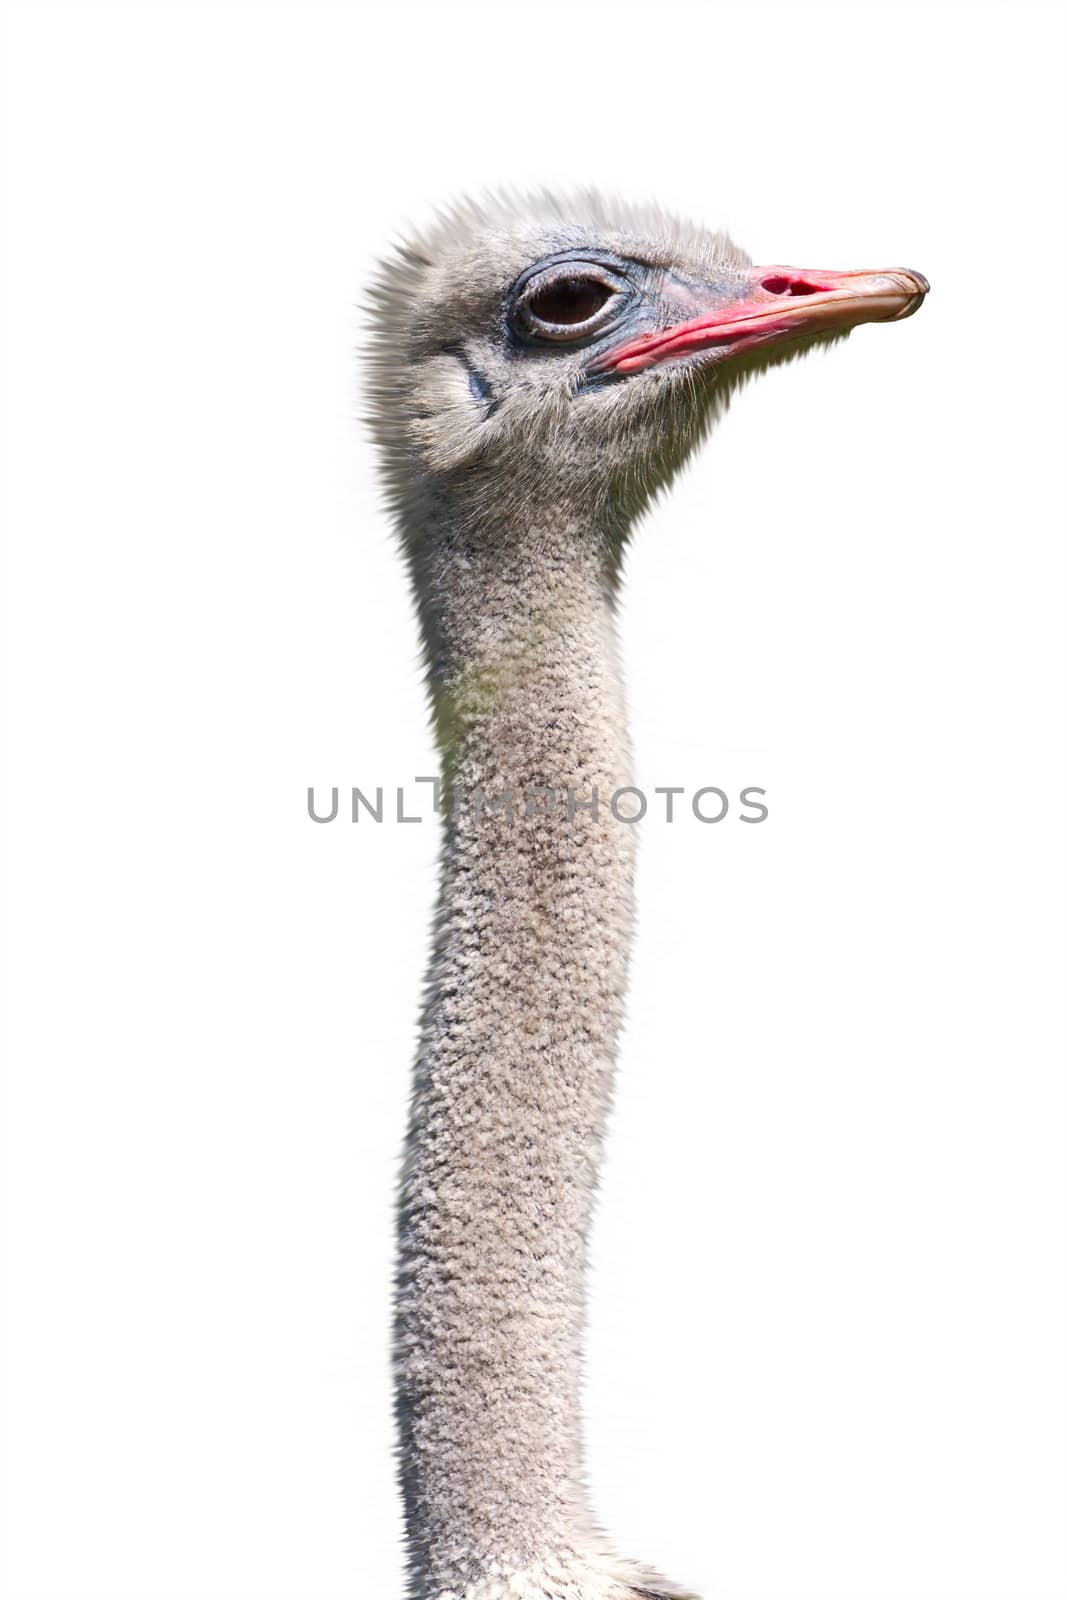 Head and long neck an ostrich close-up,isolated on white background.